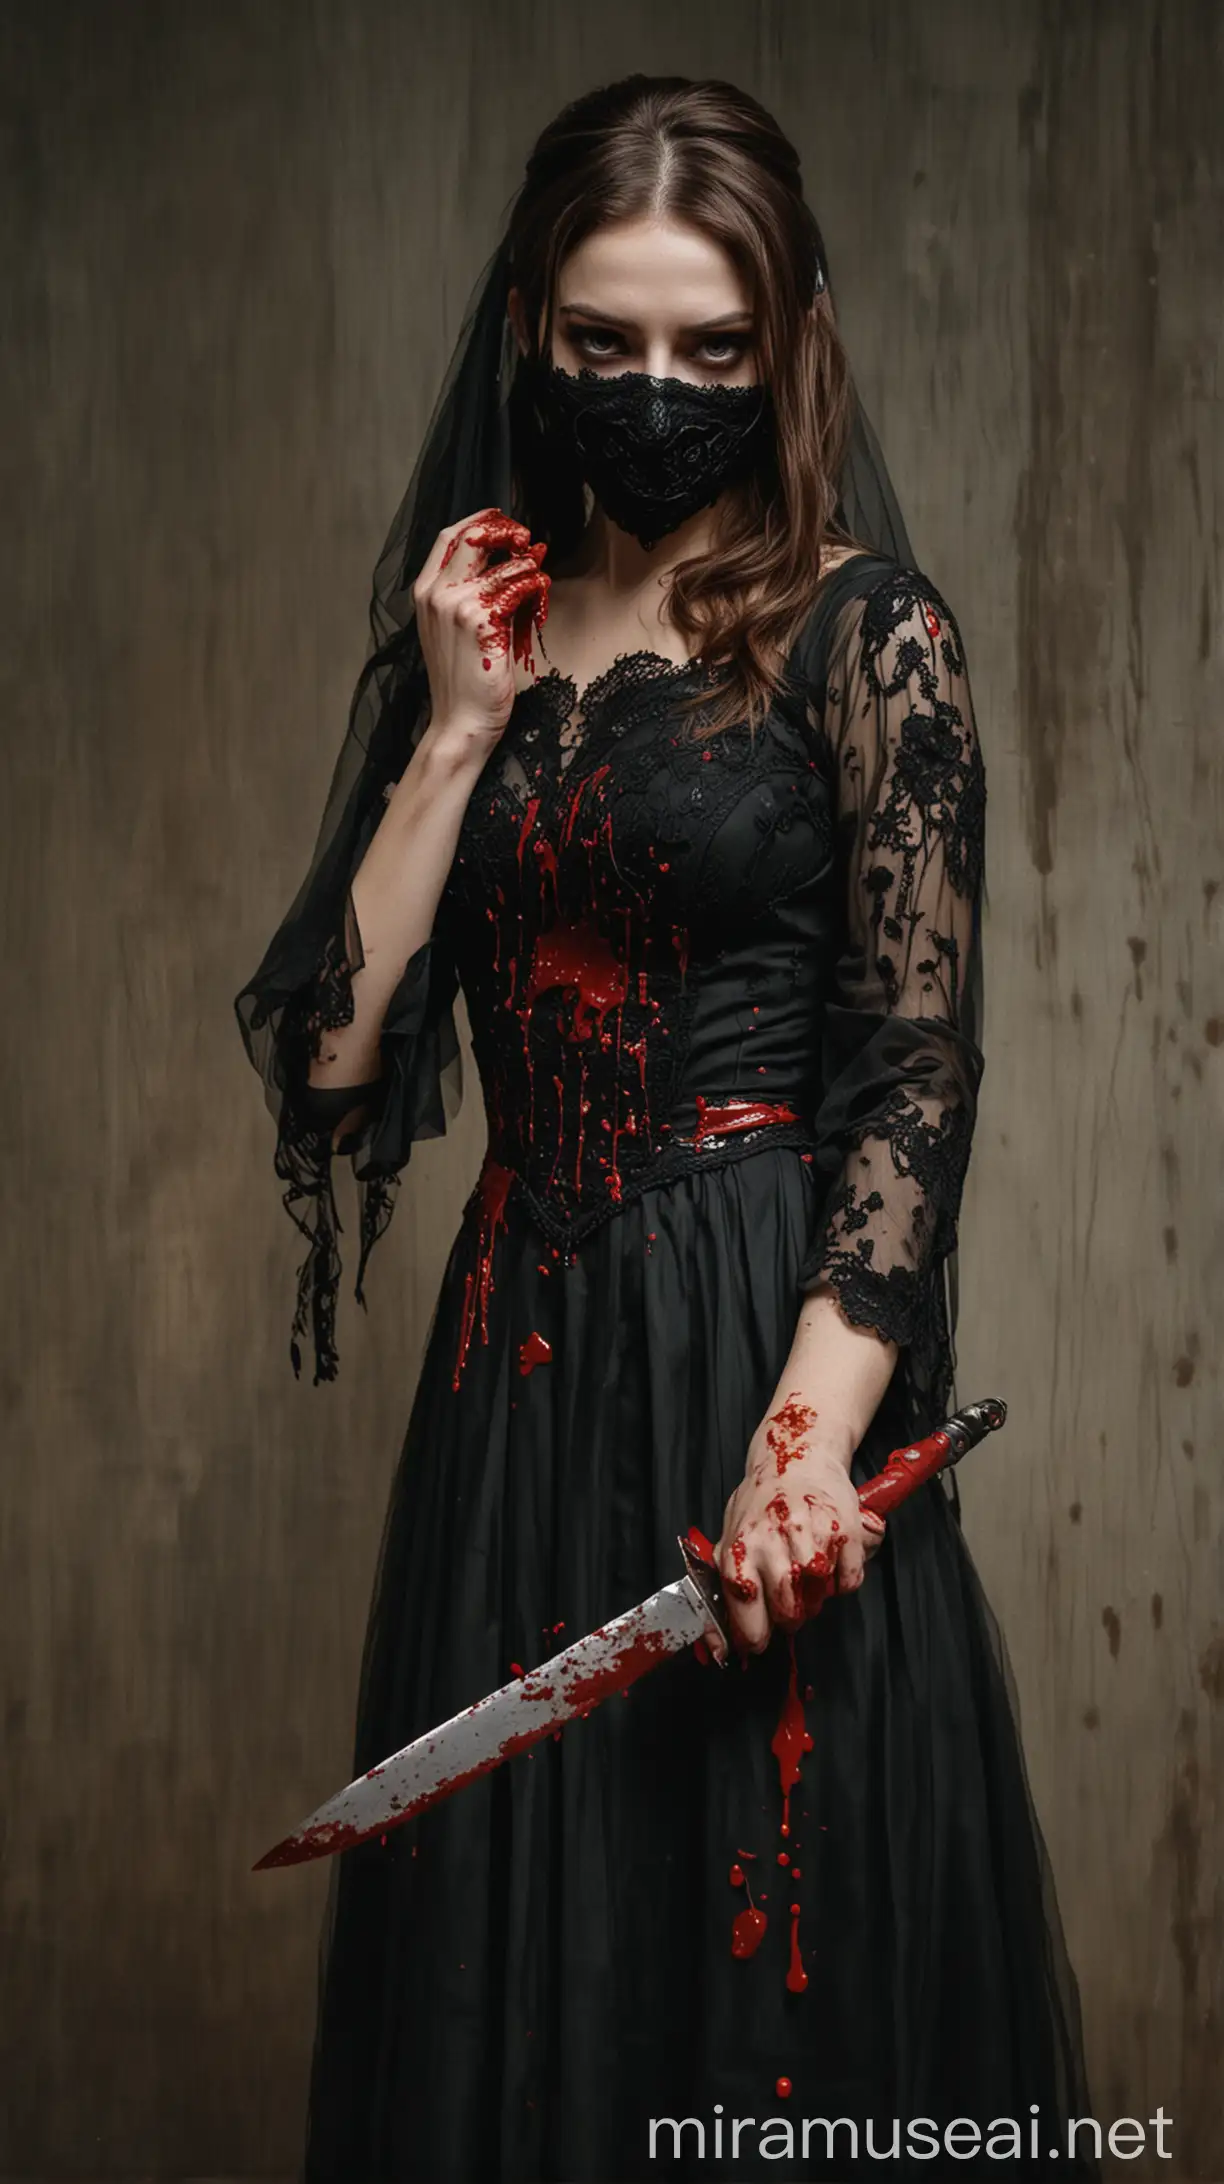 Mysterious Woman in Black Bridal Dress Holding a Bloody Knife